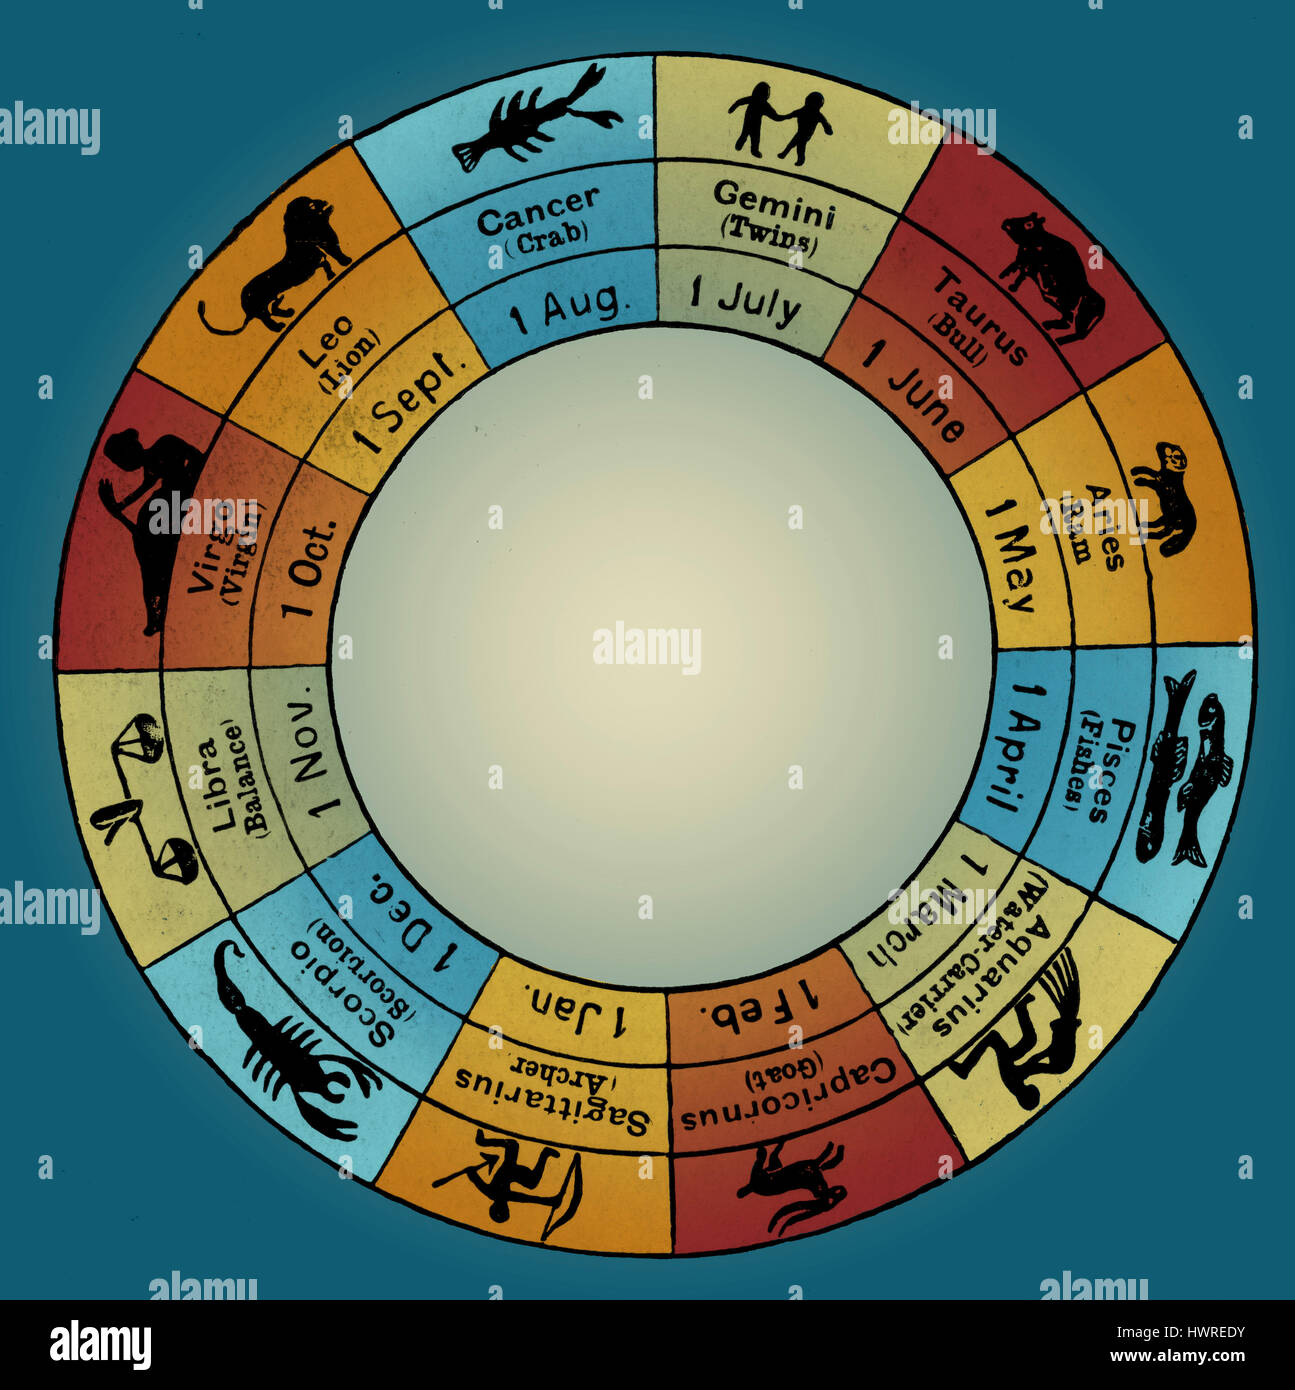 Signs Of The Zodiac The Zodiac Is The Circle Of Twelve 30 Divisions Of Celestial Longitudeformerly Employed By Astronomy Stock Photo Alamy